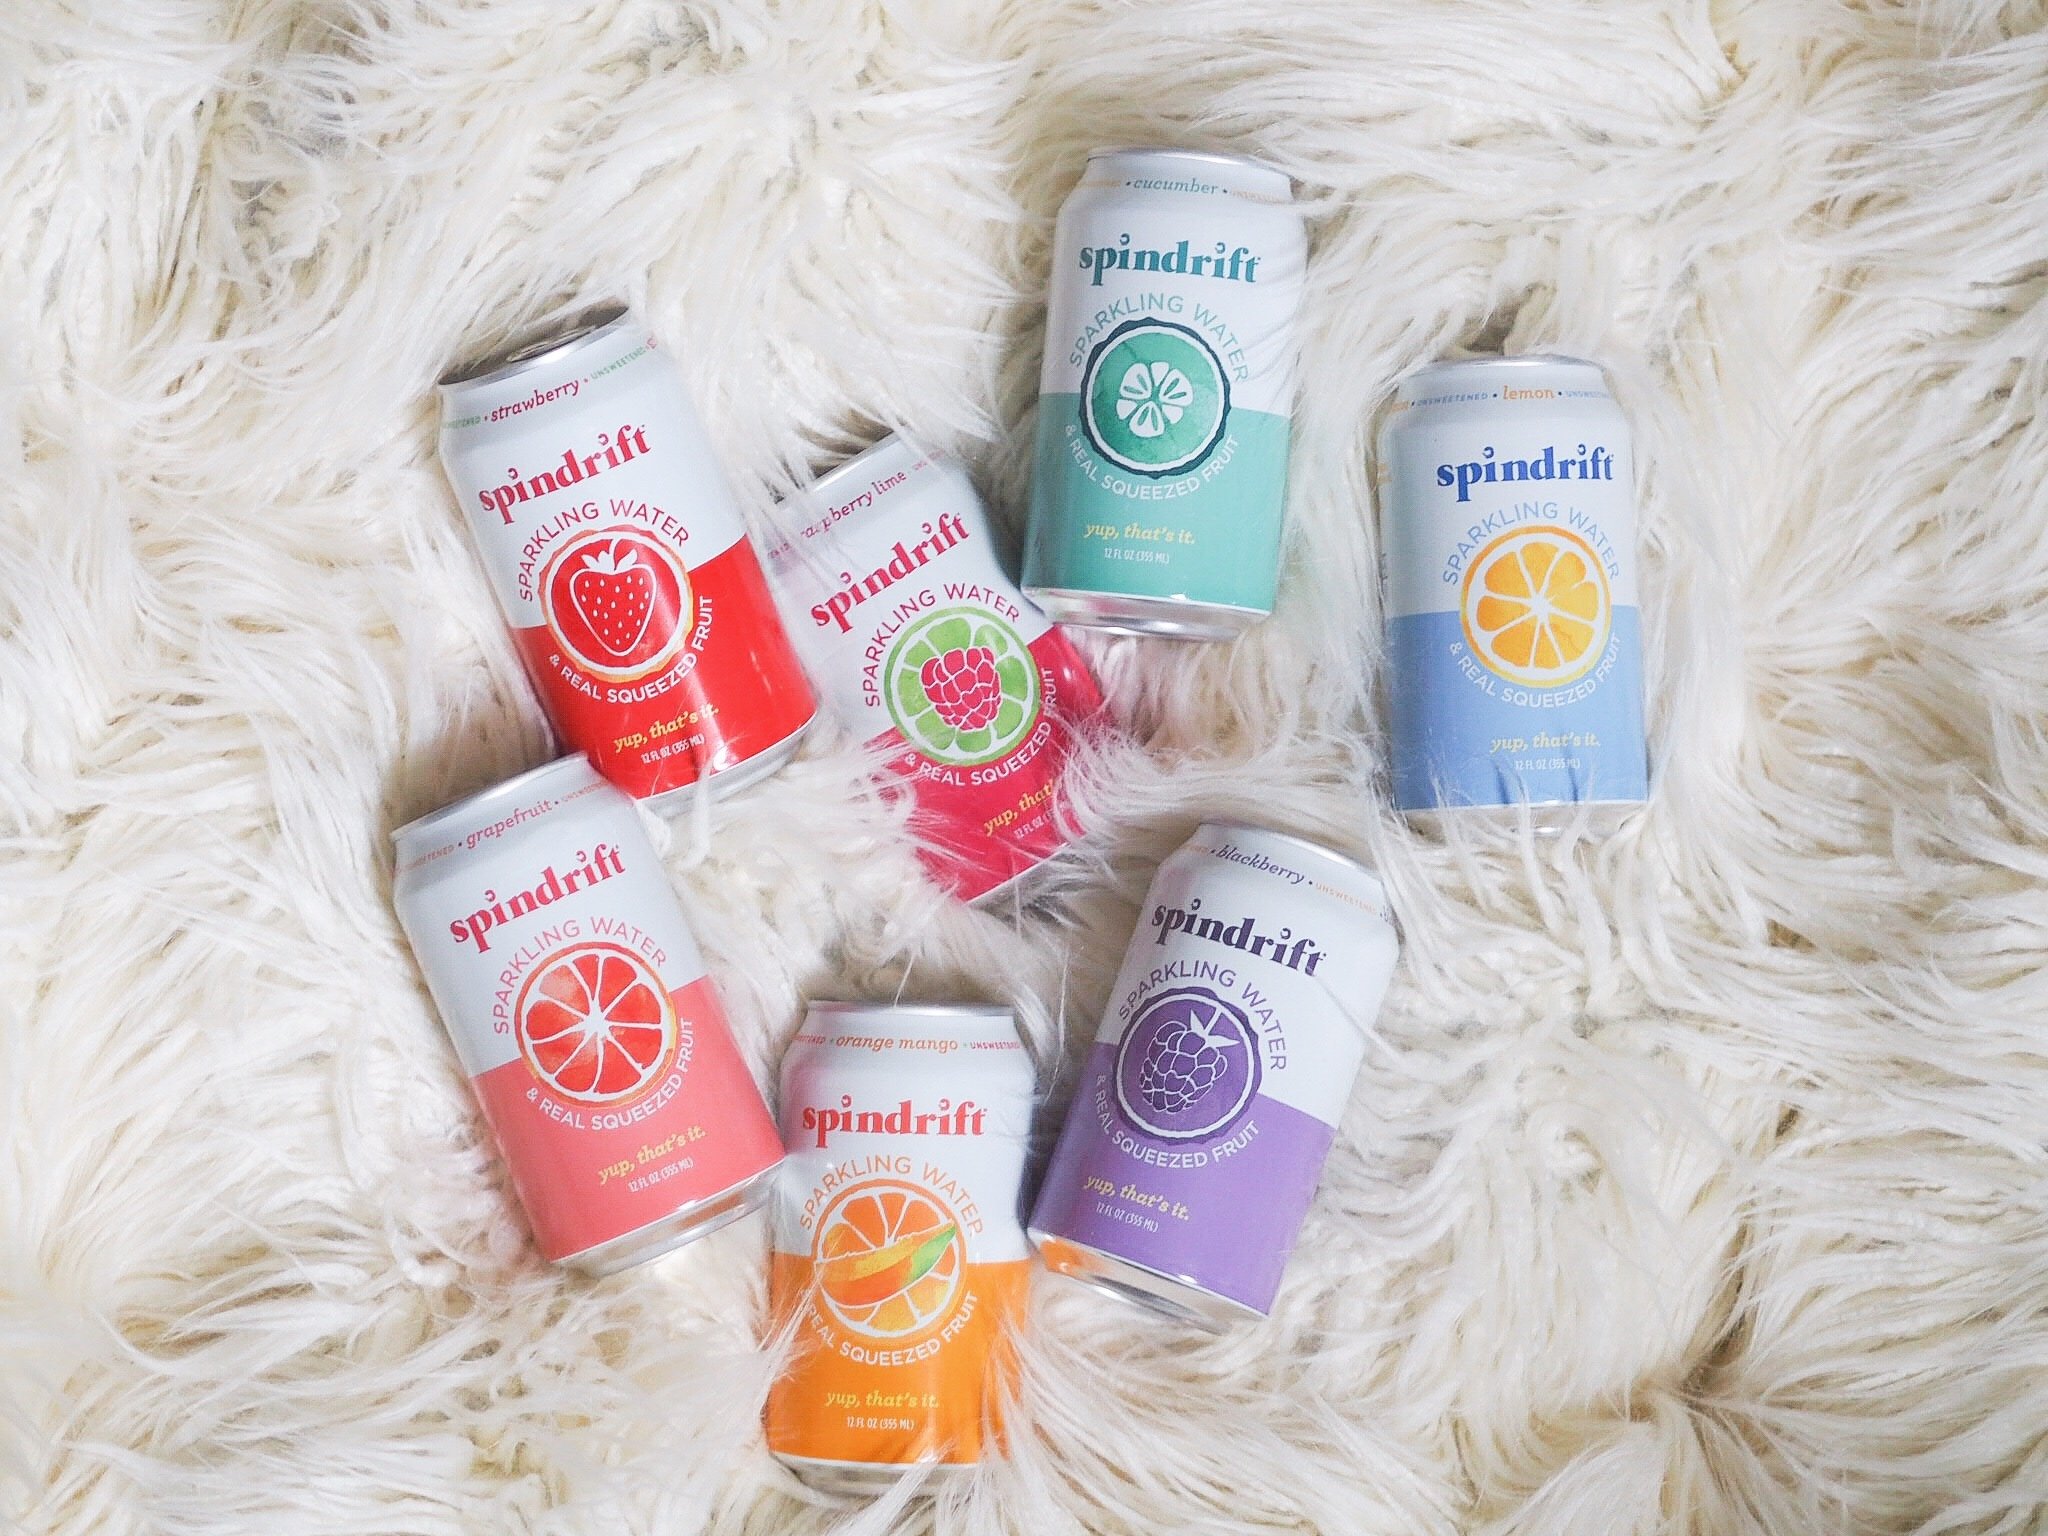 Kelsey of Blondes & Bagels talks staying refreshed and hydrated this summer with Spindrift sparkling water!